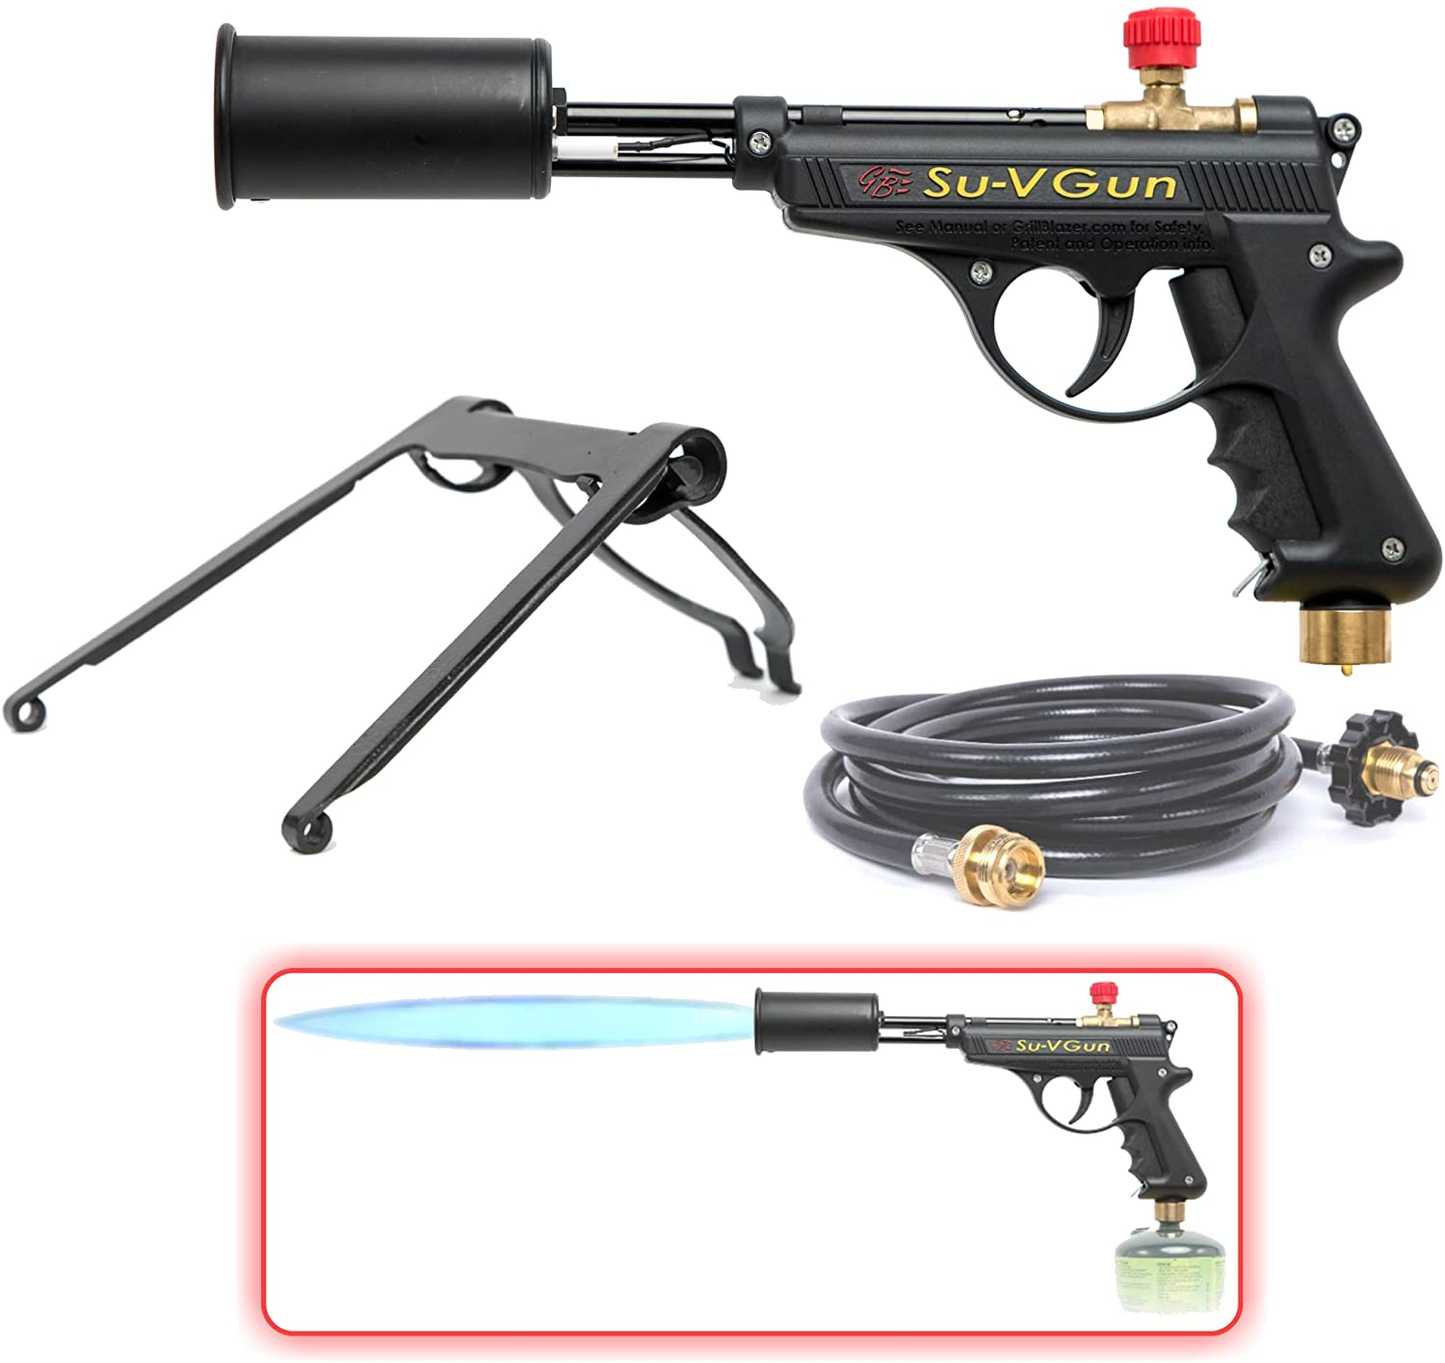 Su-Vgun Grill Torch Set - Charcoal Starter - Includes Propane Bottle Stand and 8” Hose - Professional Cooking, Grilling and BBQ Tool